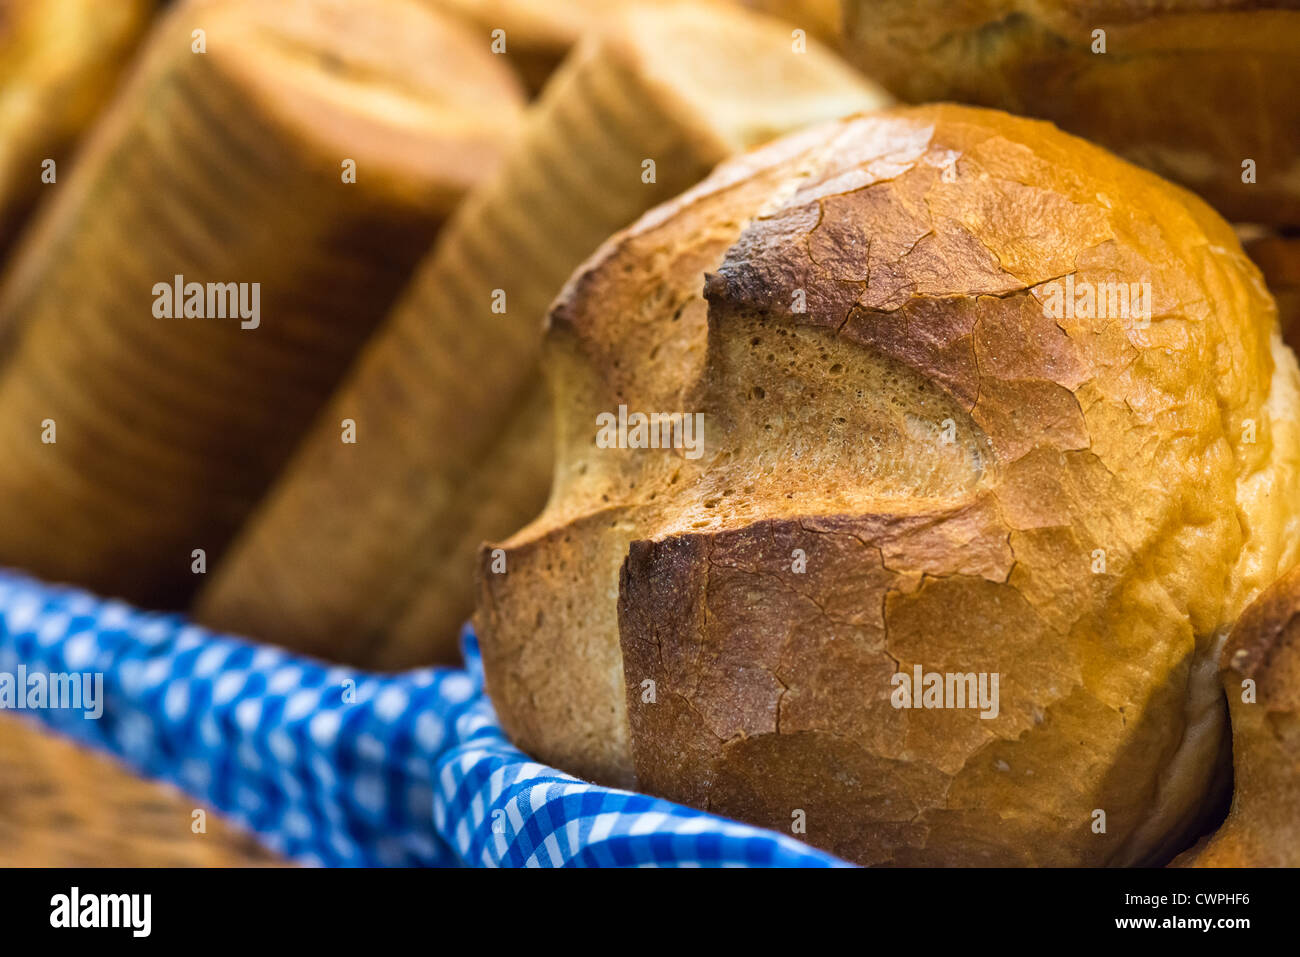 Freshly baked crusty loaves of bread in a basket. Stock Photo